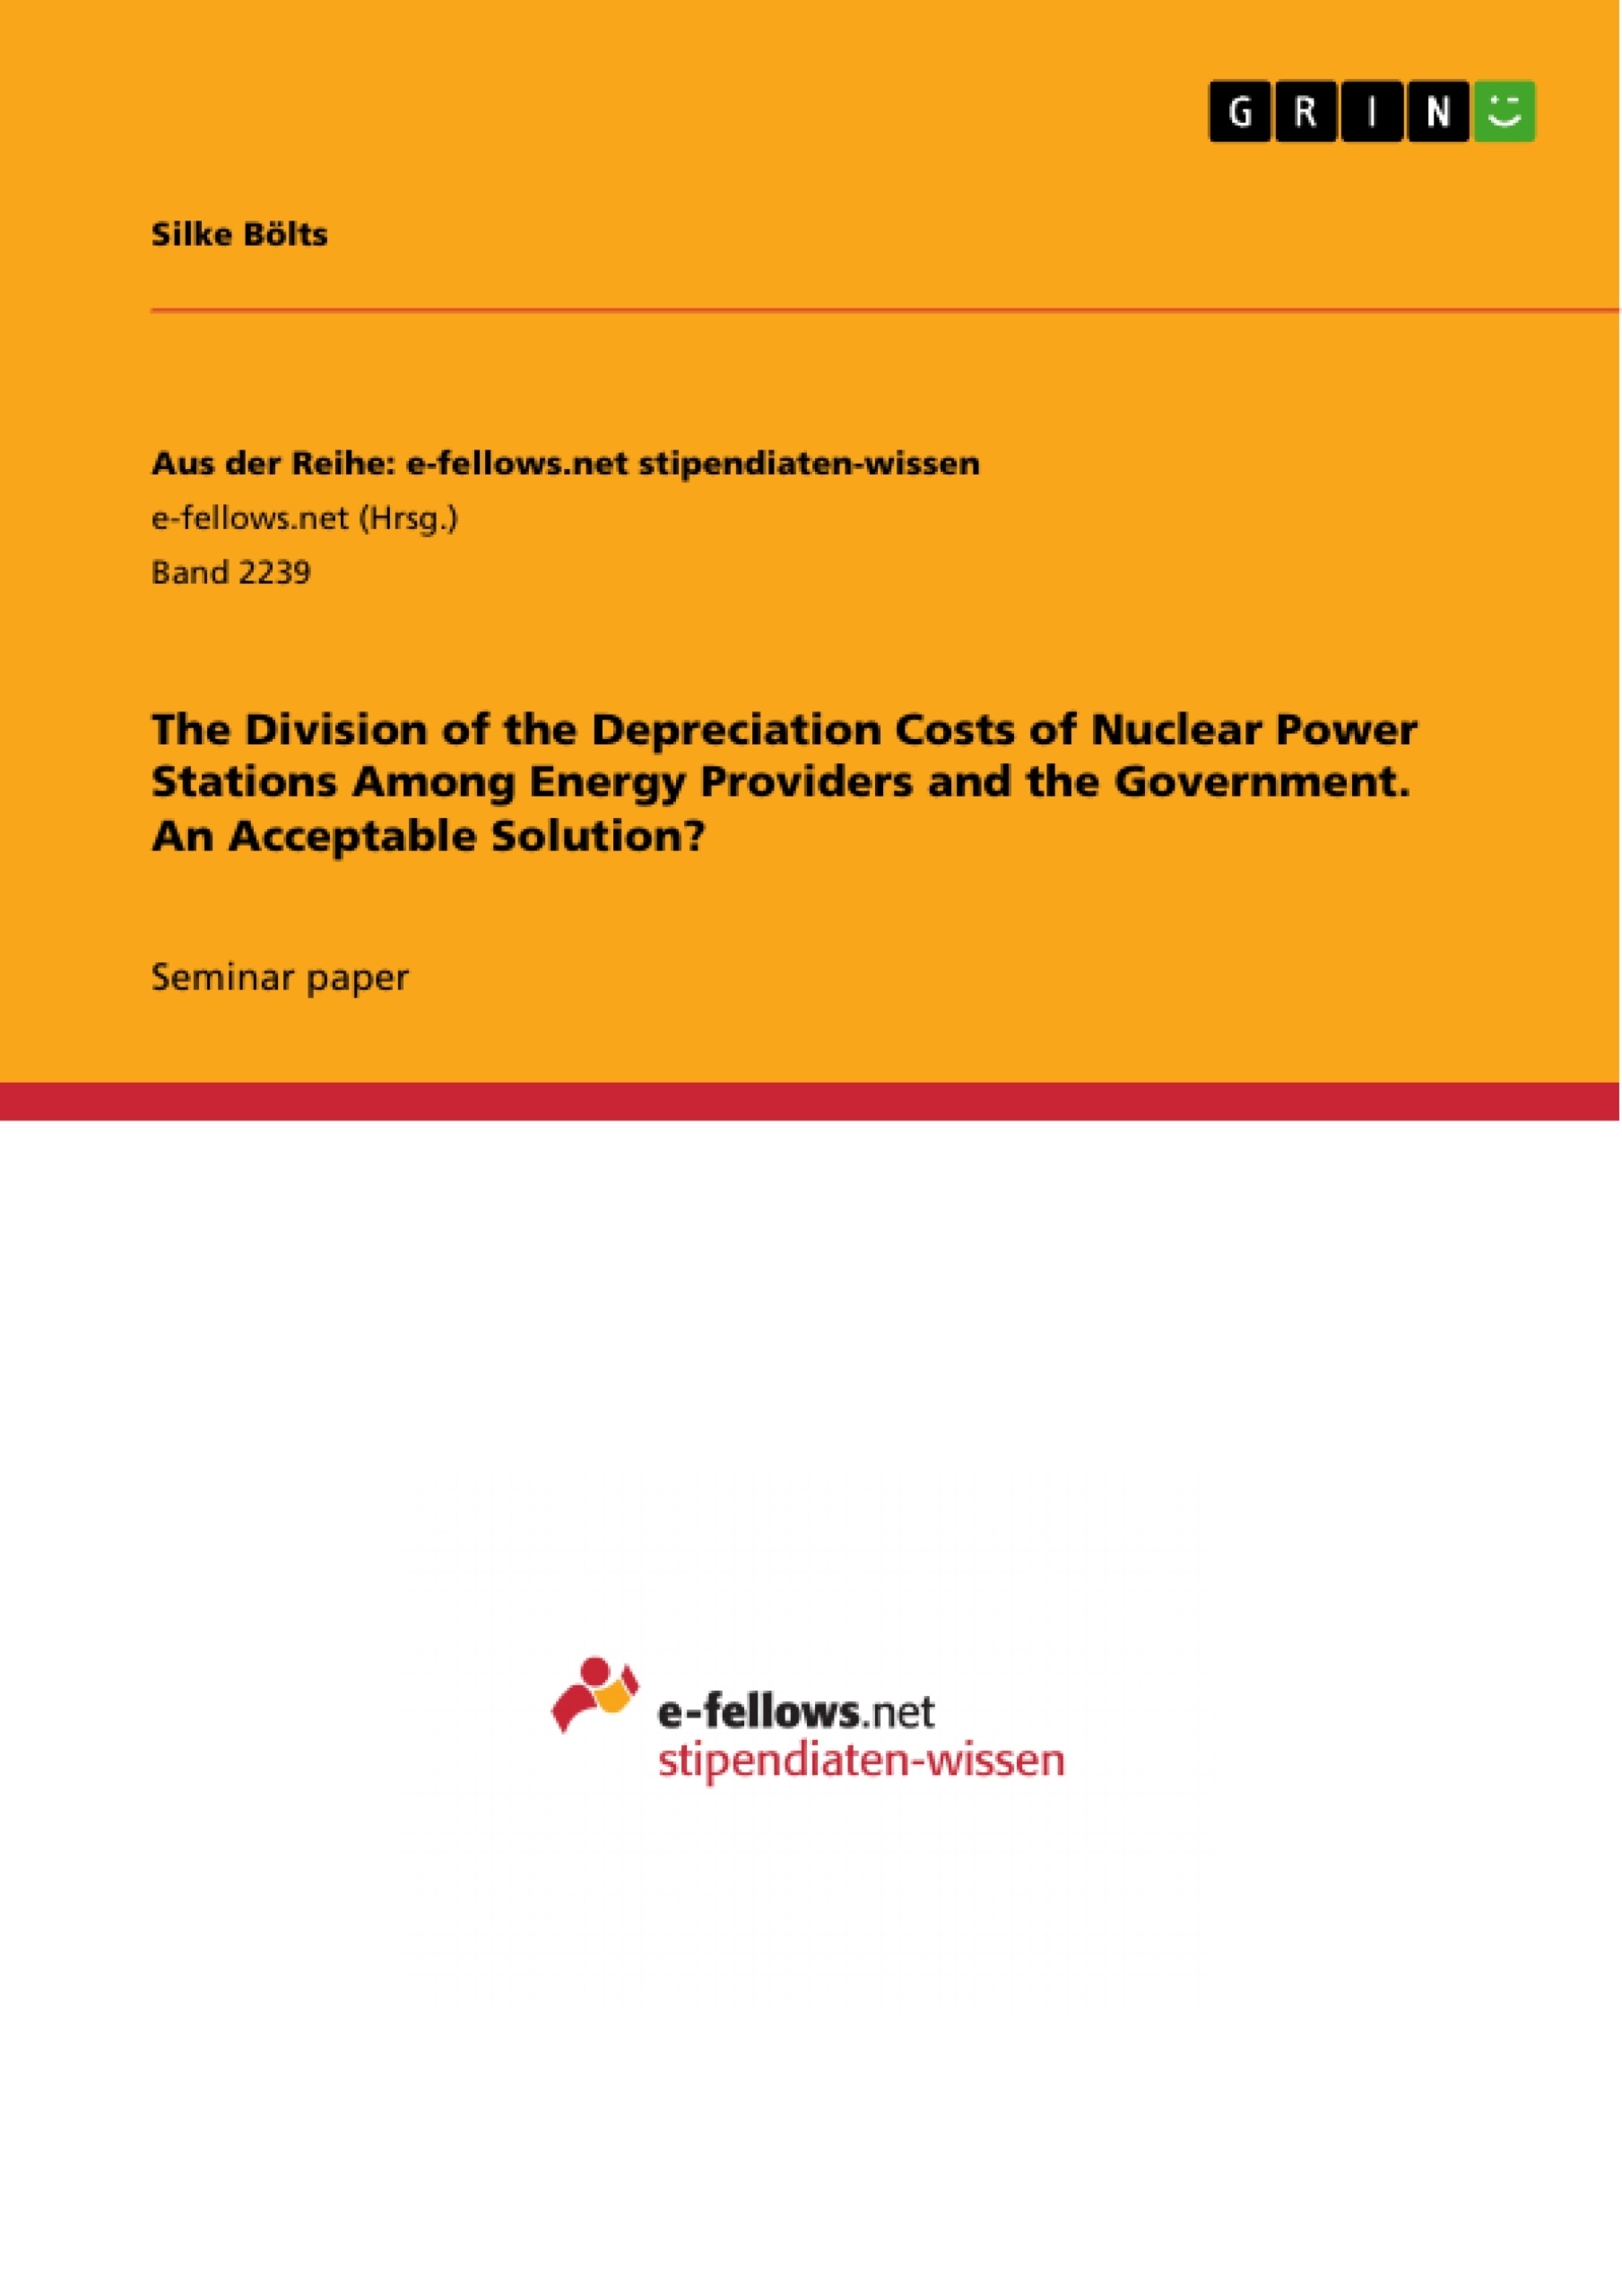 Título: The Division of the Depreciation Costs of Nuclear Power Stations Among Energy Providers and the Government. An Acceptable Solution?